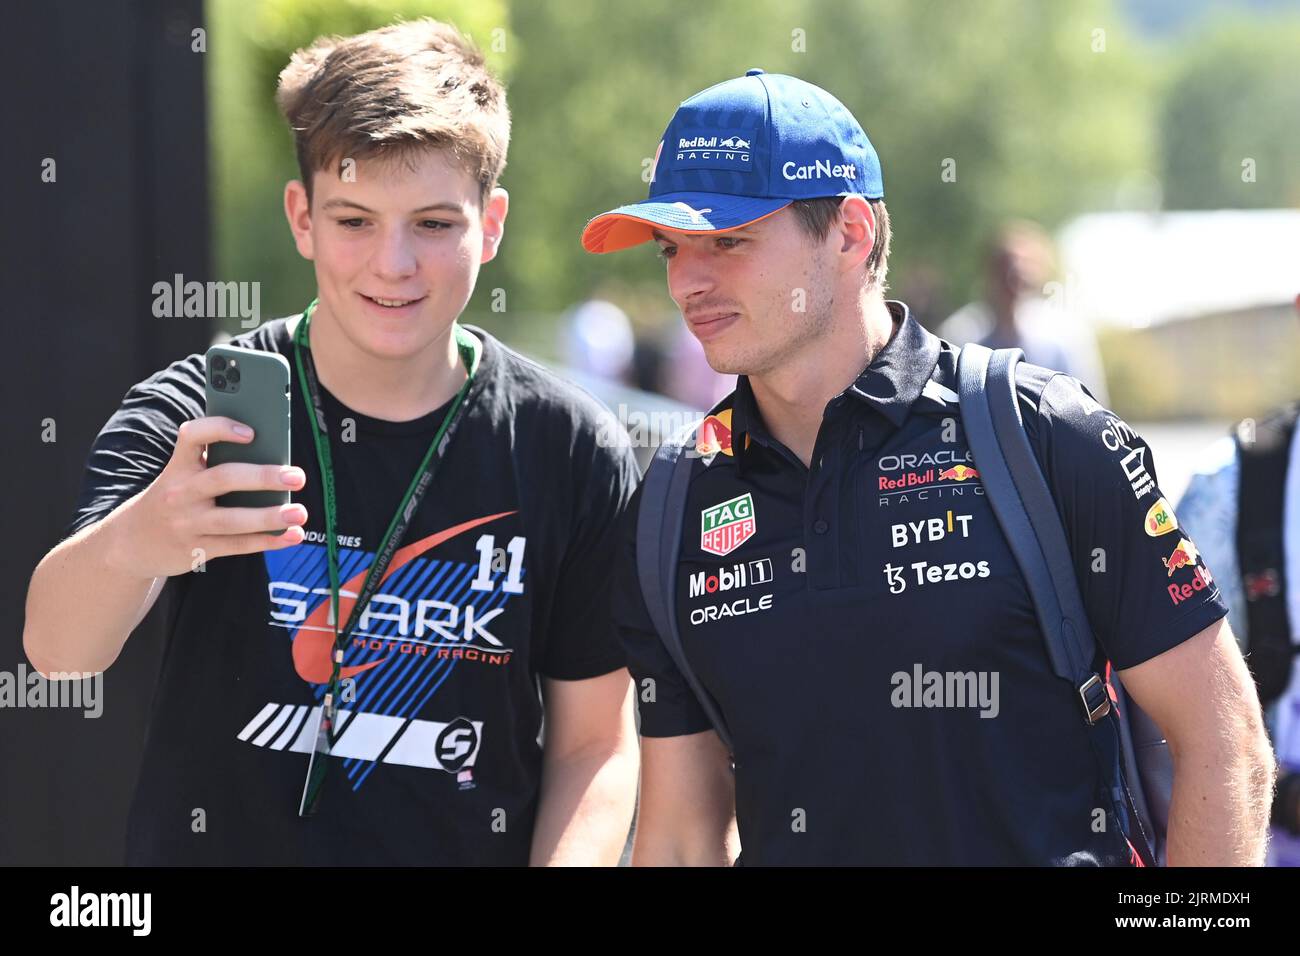 Red Bull Racing's Dutch driver Max Verstappen arrives for preparations for the Grand Prix F1 of Belgium race, in Spa-Francorchamps, Wednesday 24 August 2022. The Spa-Francorchamps Formula One Grand Prix takes place this weekend, from August 26th to August 28th. BELGA PHOTO DIRK WAEM Stock Photo